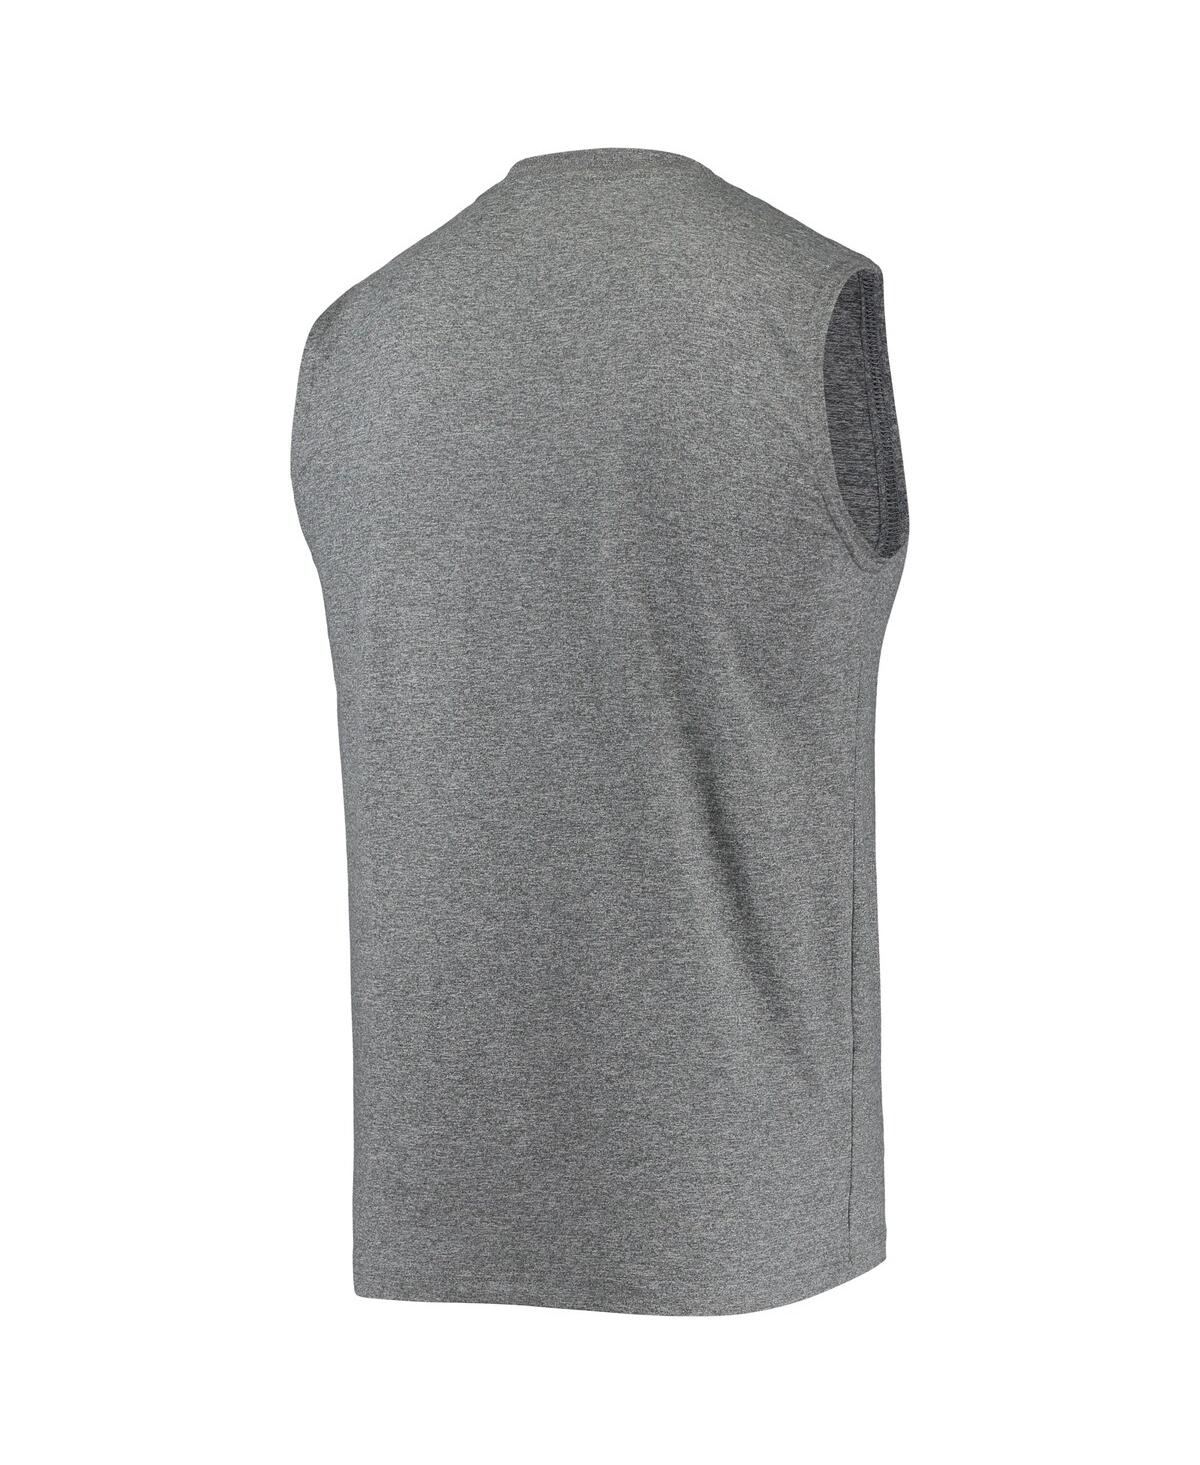 Shop New Era Men's  Heathered Gray Chicago White Sox Muscle Tank Top